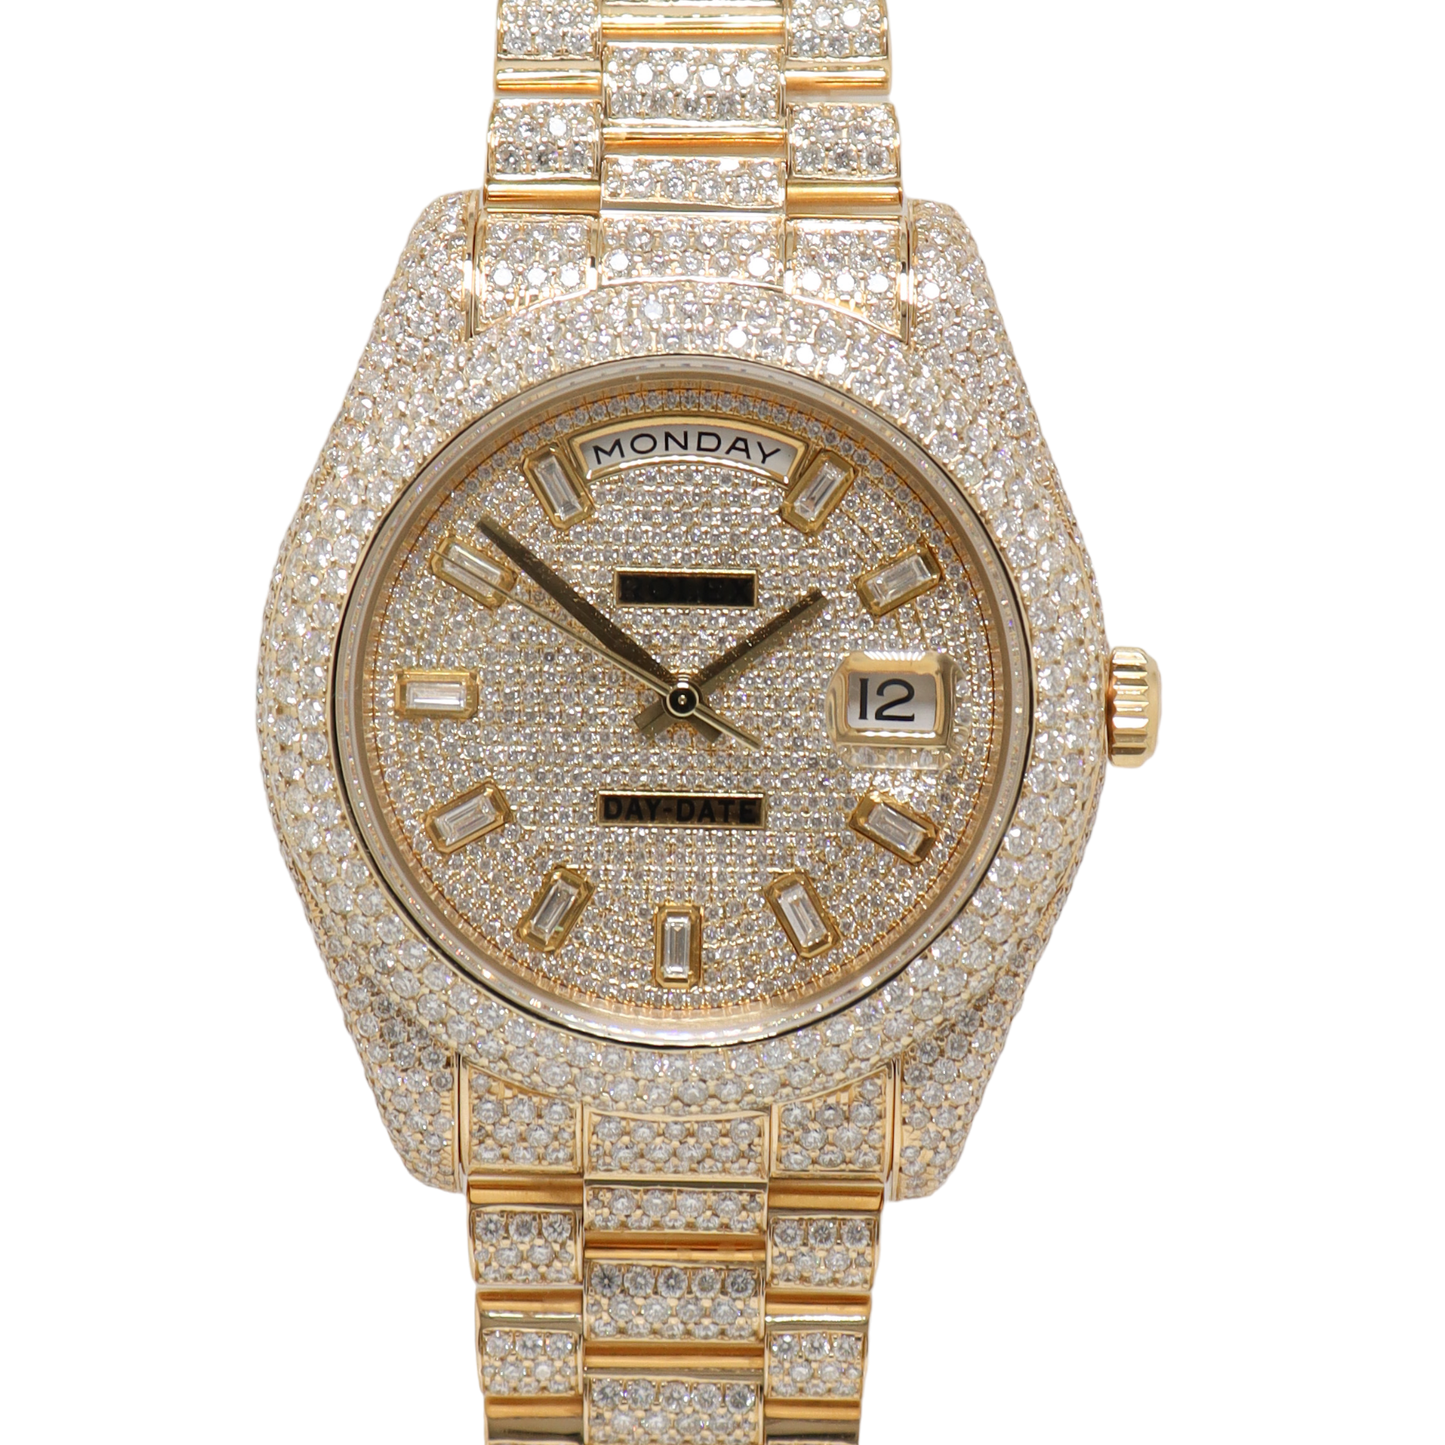 Rolex Day Date II Yellow Gold 41mm Iced Out Pave Diamond Dial Watch Reference#: 218238 - Happy Jewelers Fine Jewelry Lifetime Warranty